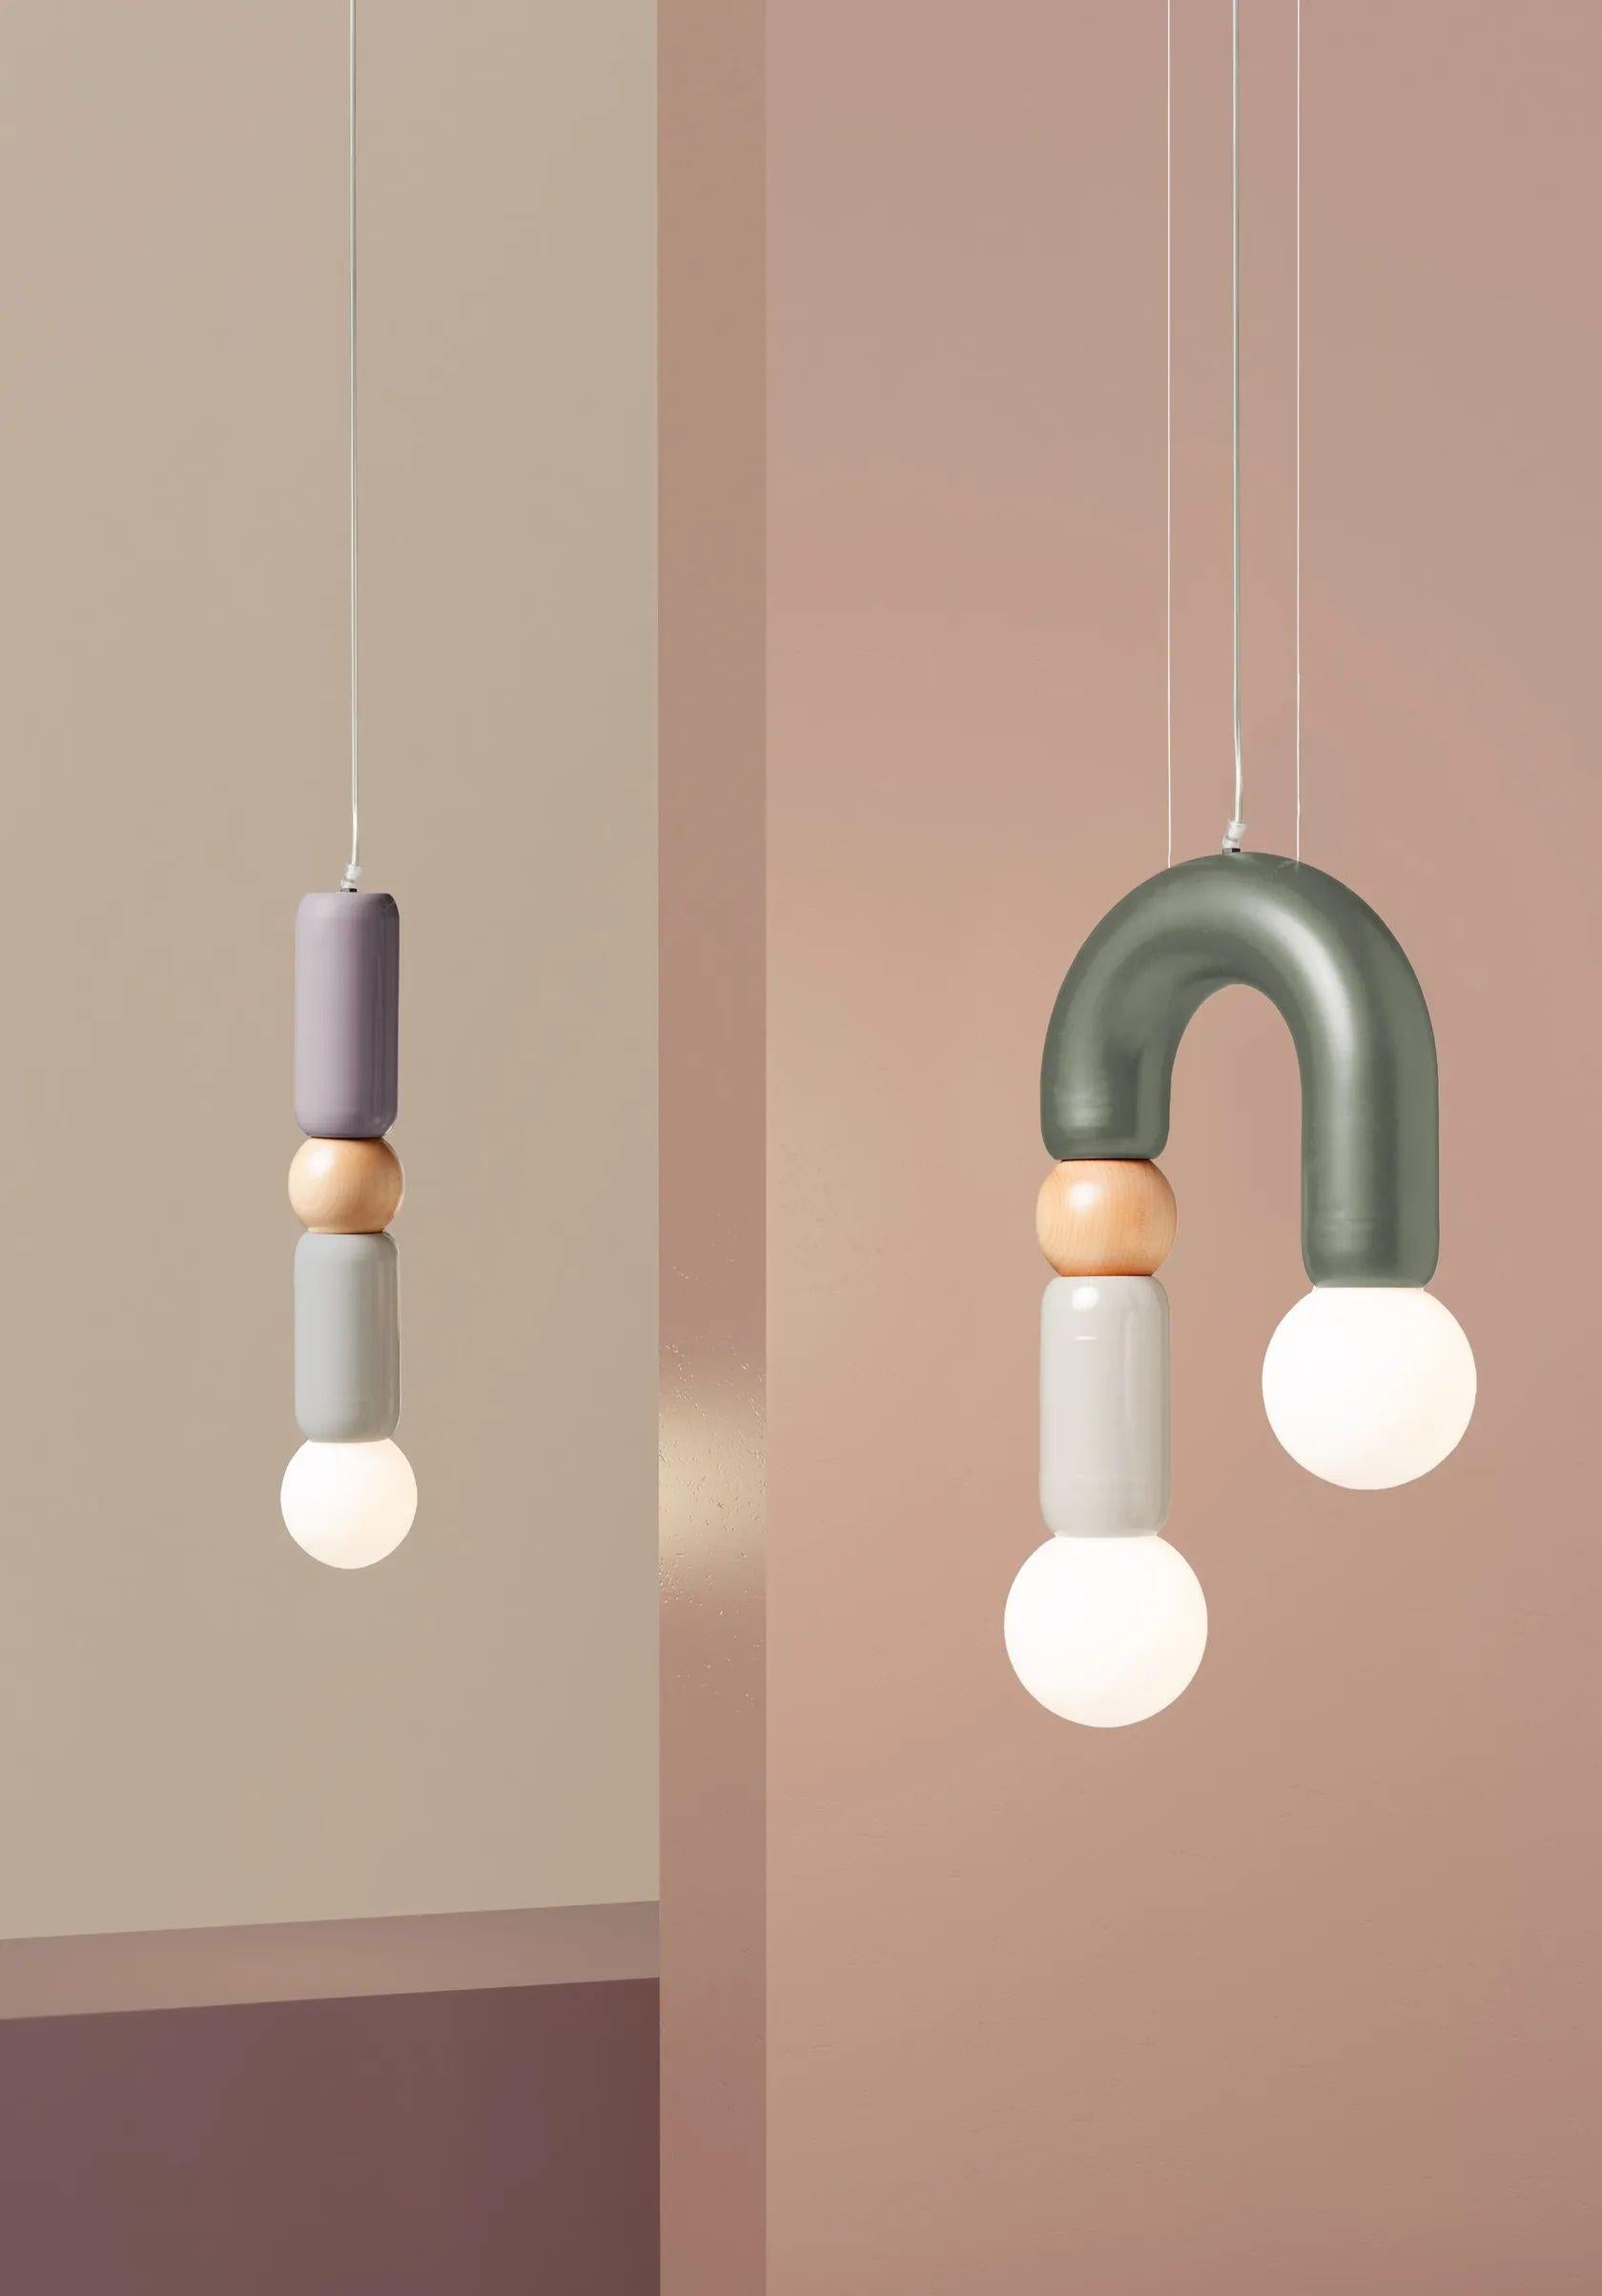 Play I Pendant Lamp by Utu Lamps
Dimensions: D 14 x H 61 cm
Materials: Lacquered metal, Brass, Nickel/copper, Natural oak
Variations Available. Please contact us.

All our lamps can be wired according to each country. If sold to the USA it will be